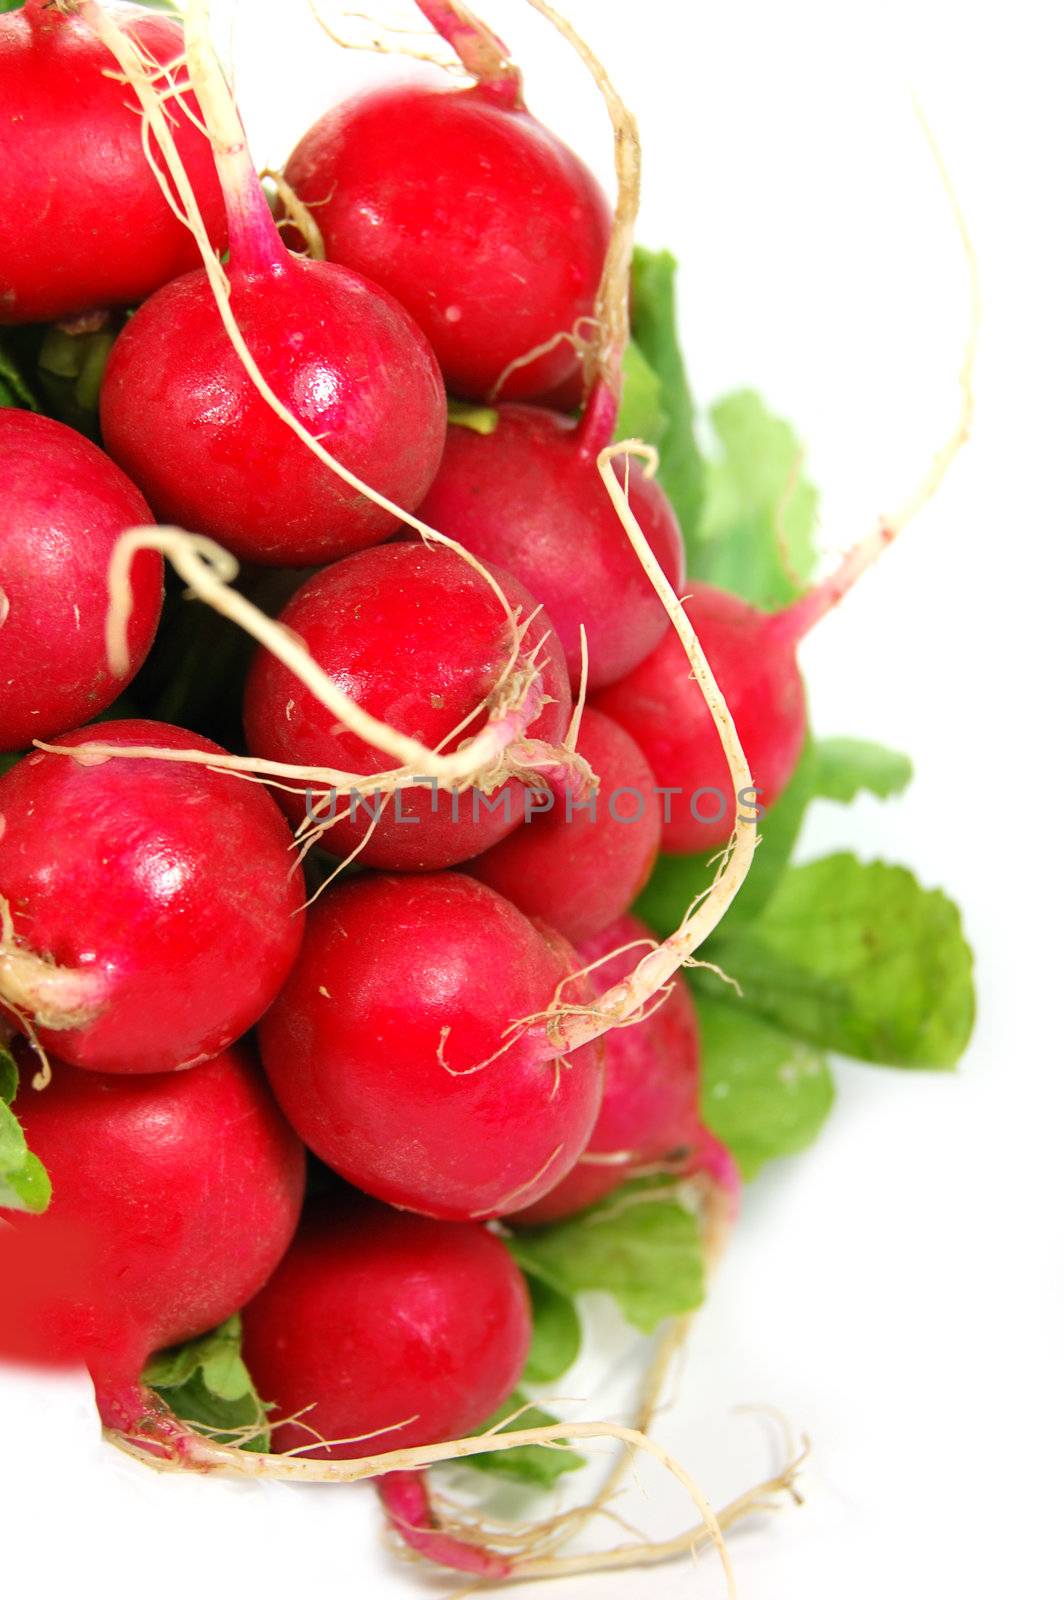 Radish with green ends by Angel_a